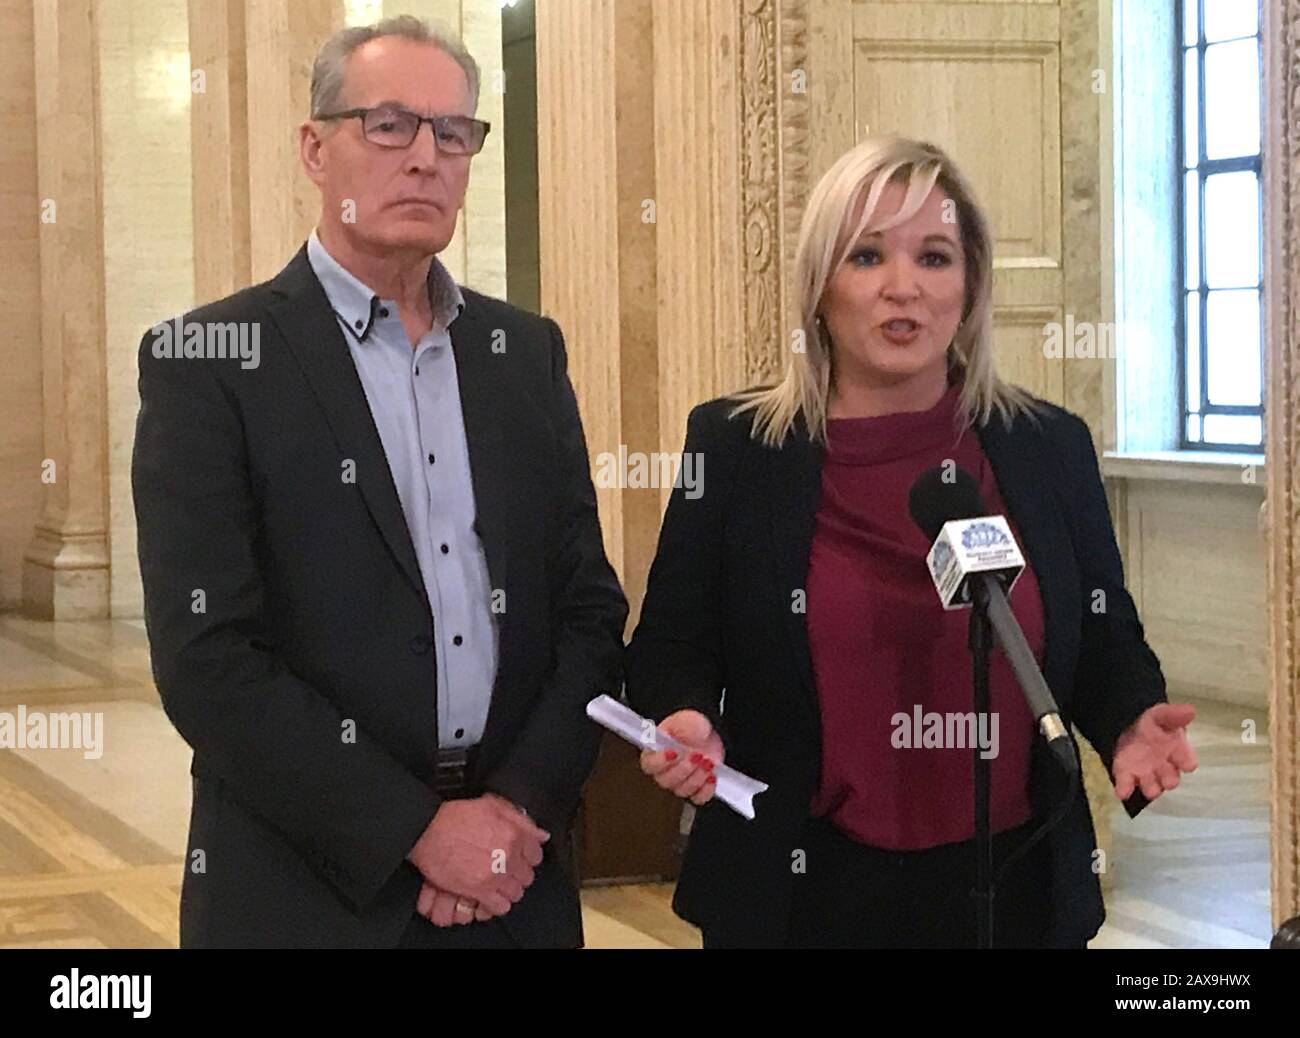 Sinn Fein vice president Michelle O'Neill with MLA Gerry Kelly speaking in Parliament Buildings in Belfast, they revealed they have been informed by the Police Service of Northern Ireland about a dissident republican plot against them. Stock Photo